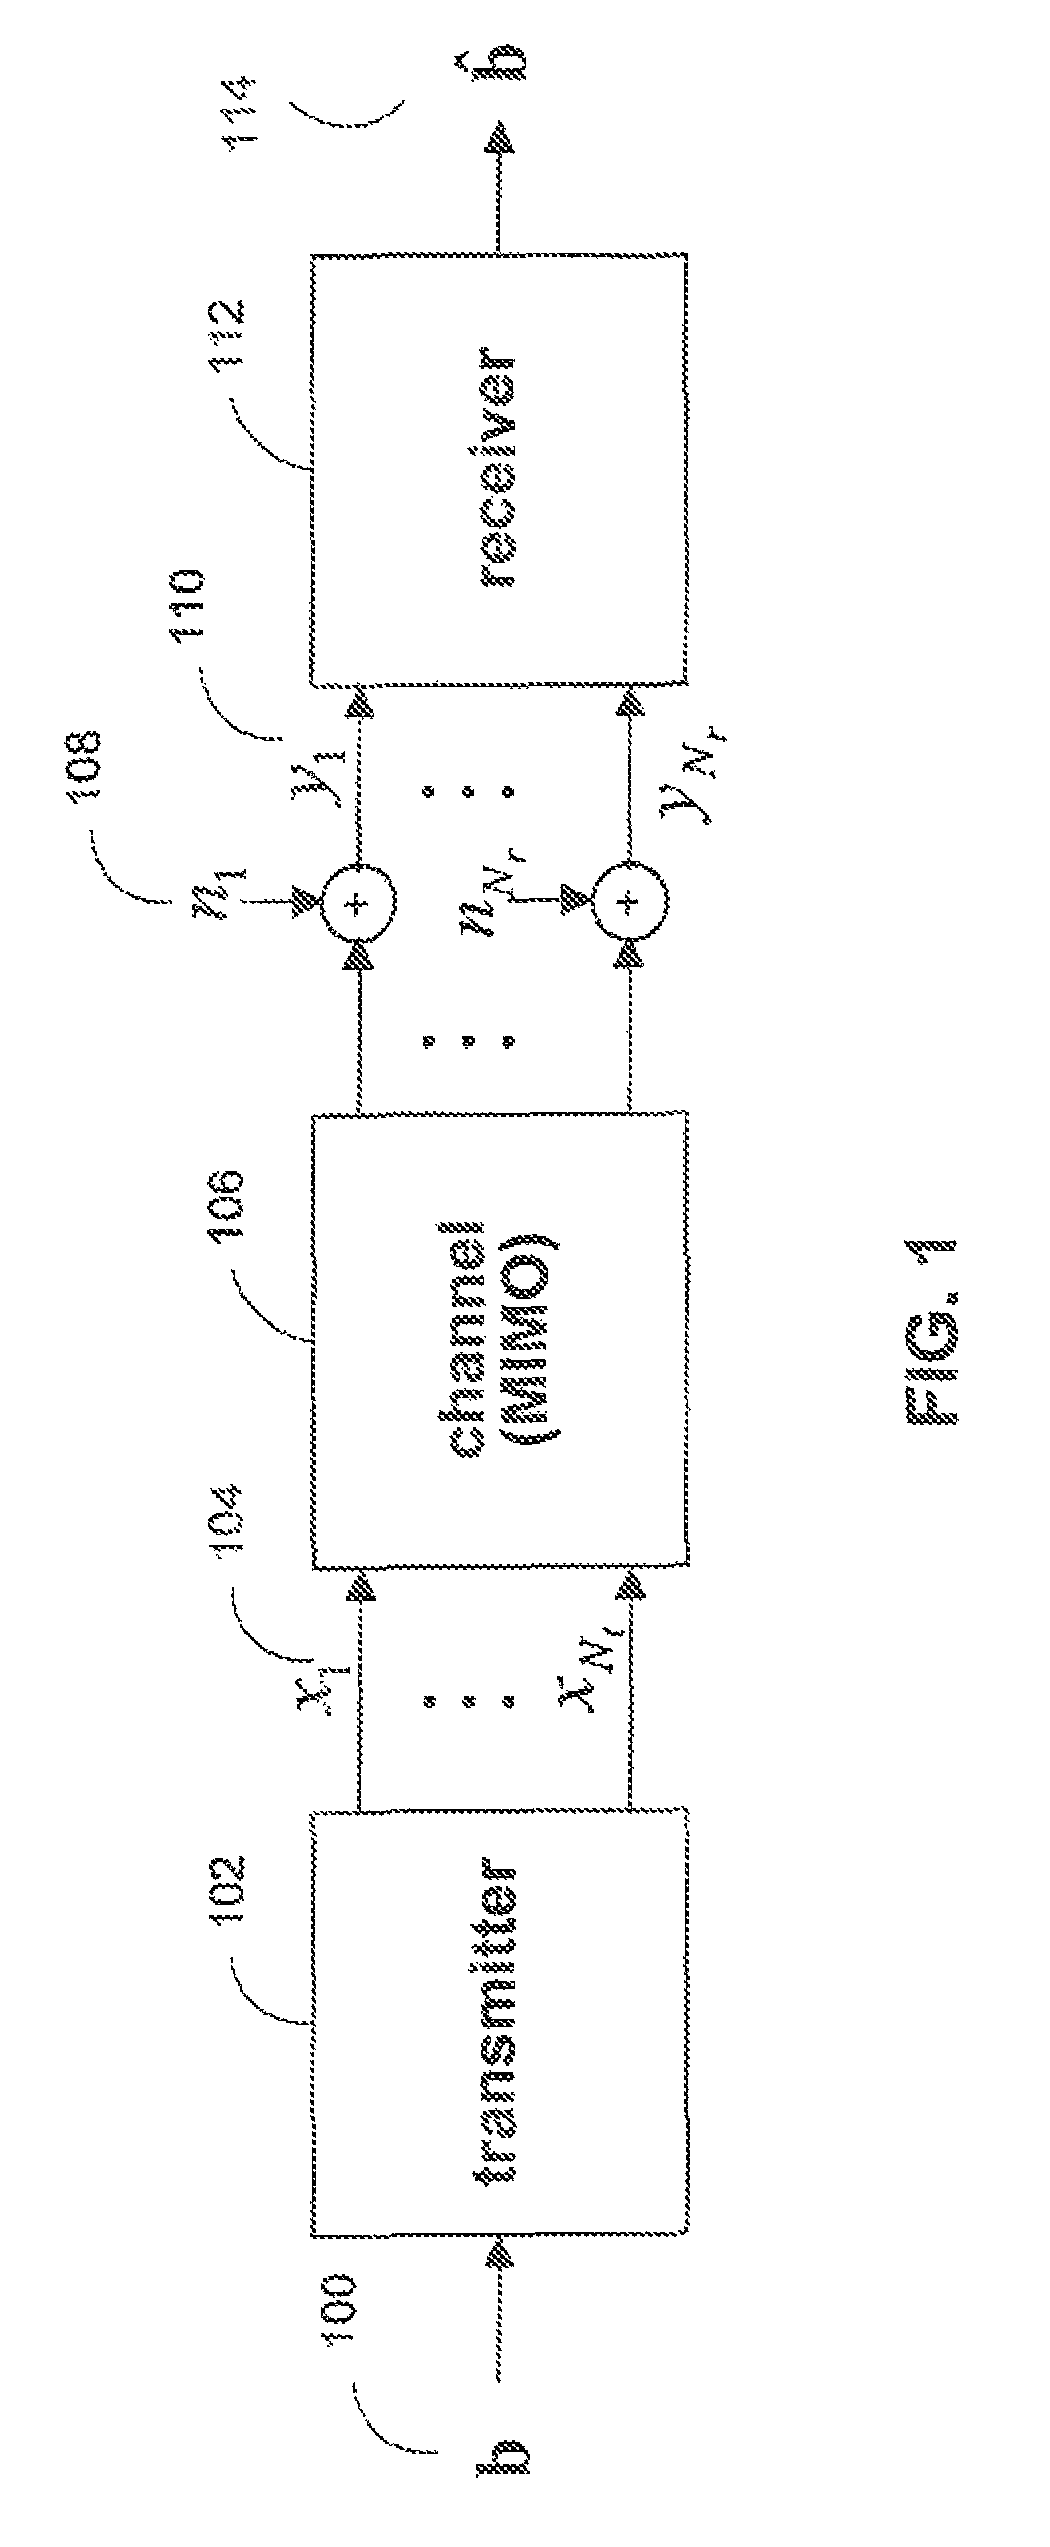 Optimal linear equalizer for MIMO systems with HARQ and/or repetition coding